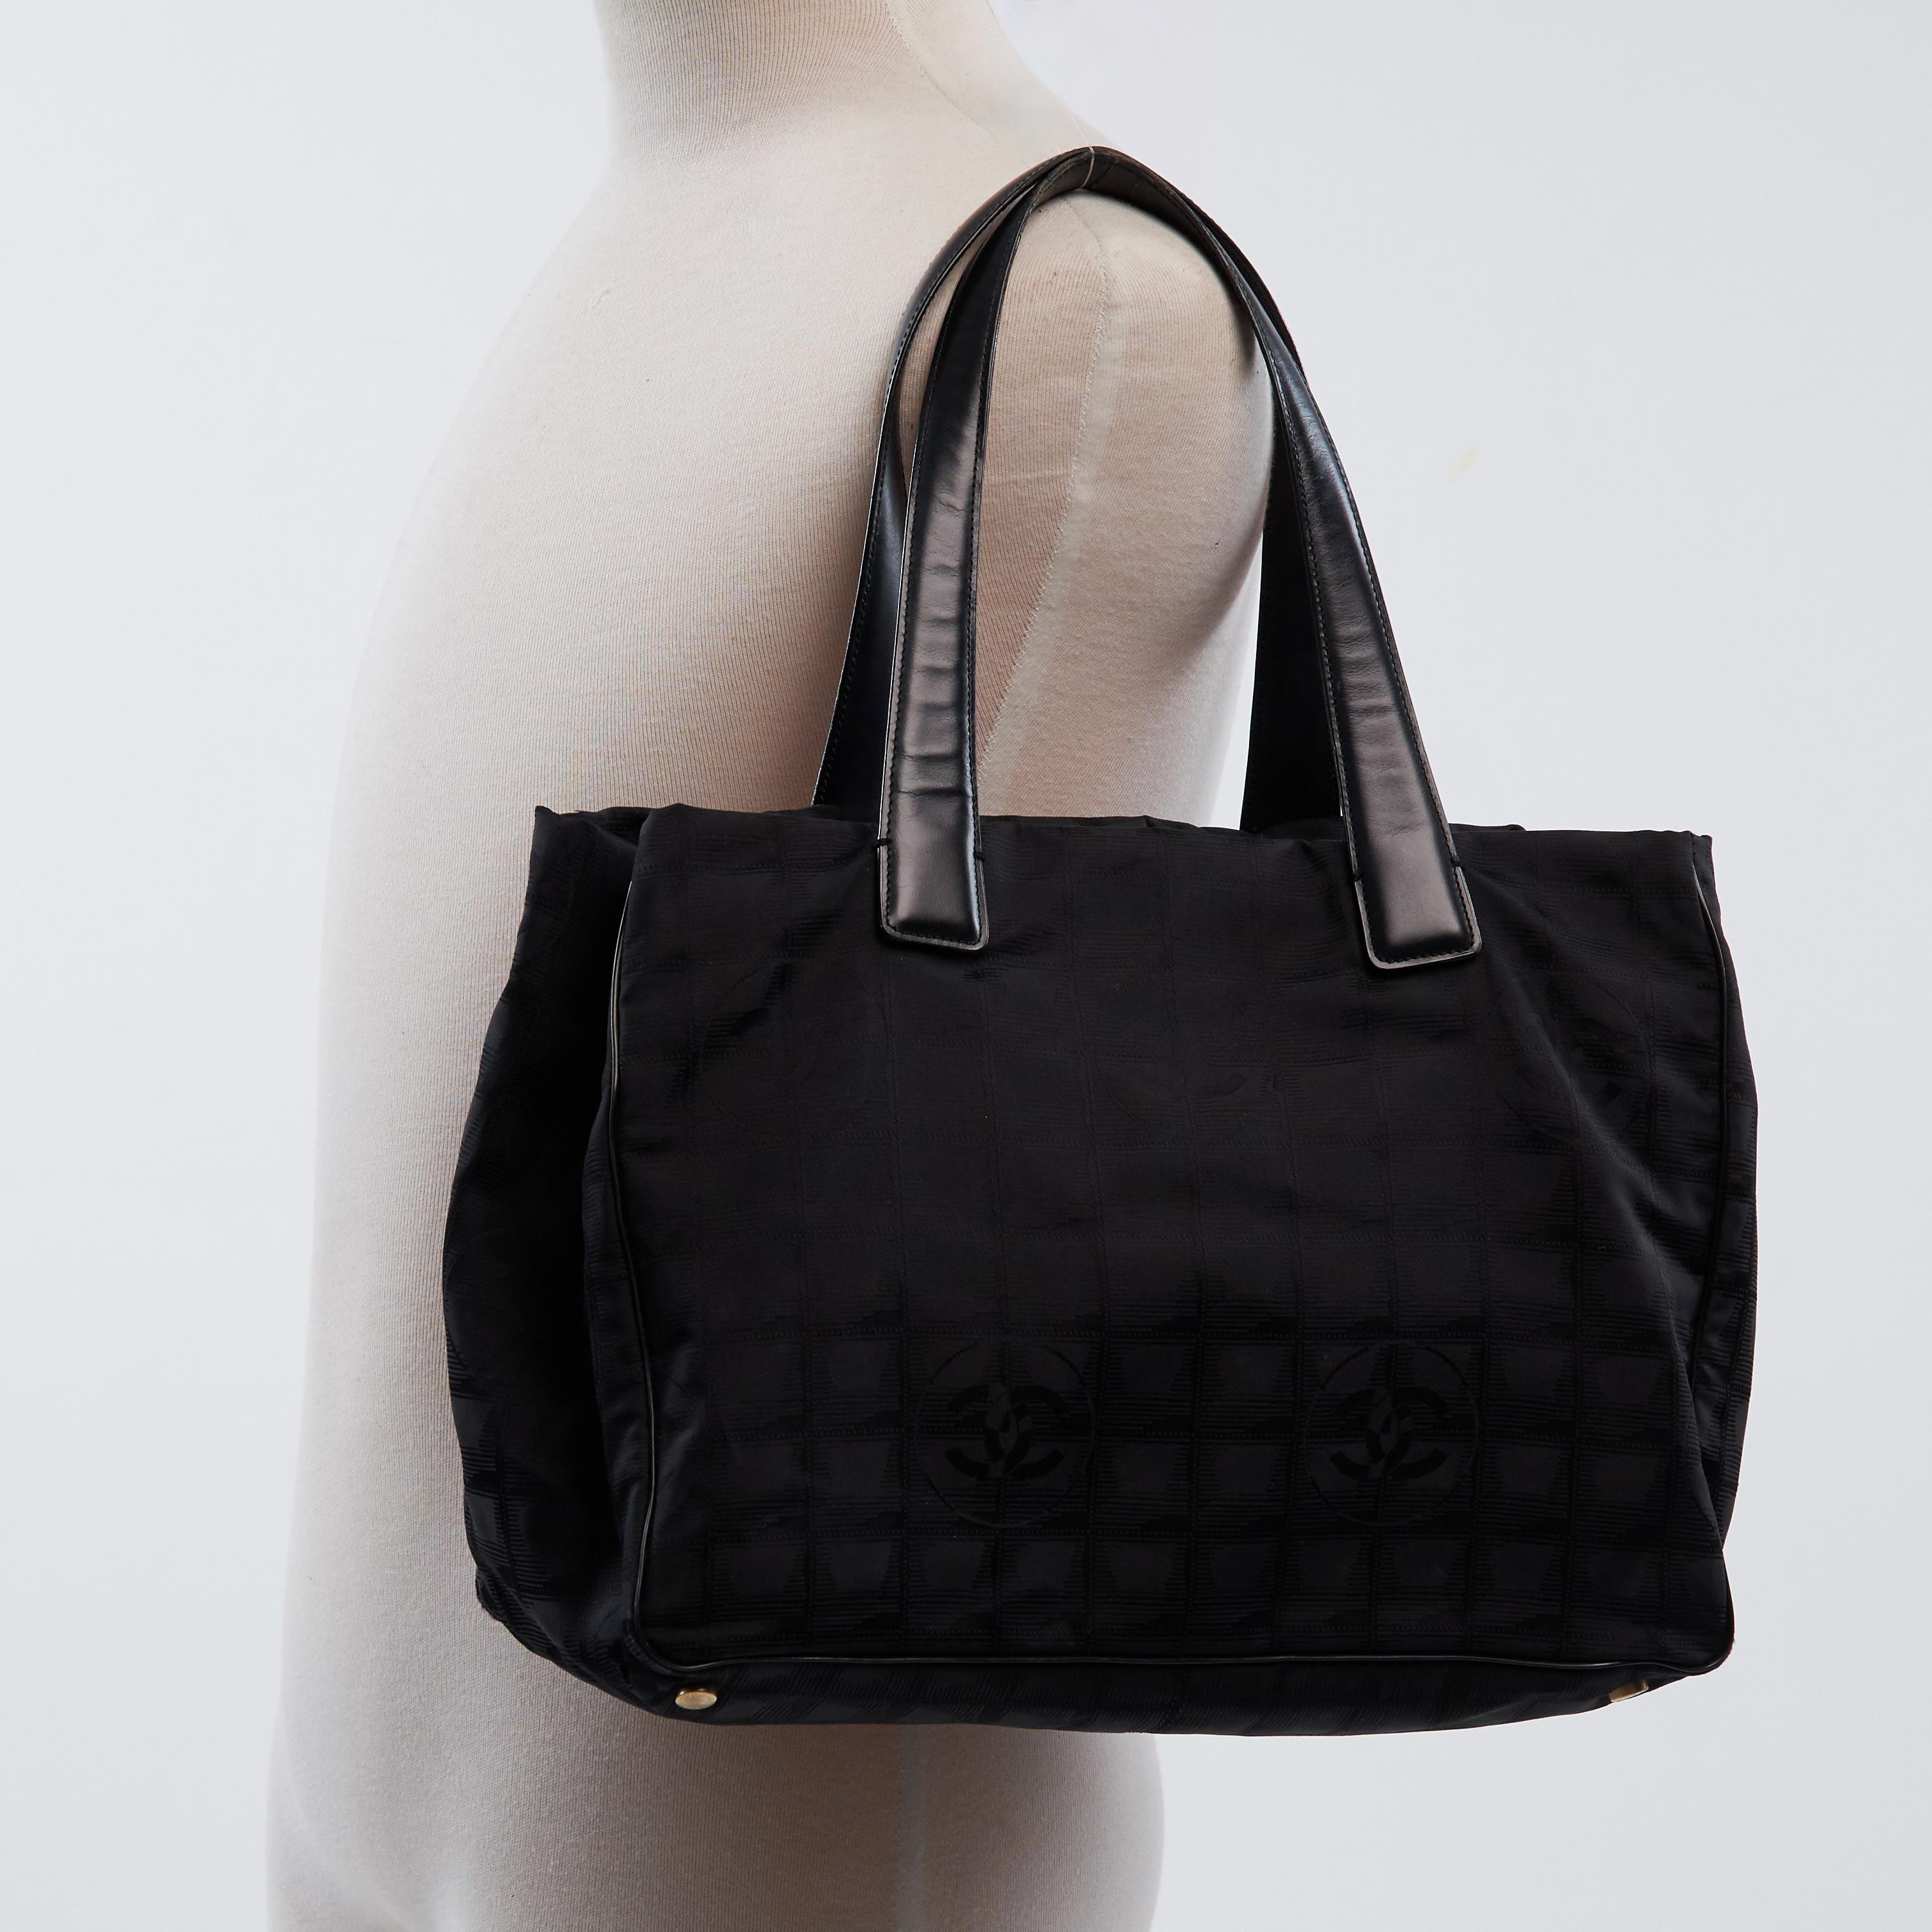 Chanel Vintage Black Nylon Travel Line Tote Bag (Circa 2005) In Good Condition For Sale In Montreal, Quebec